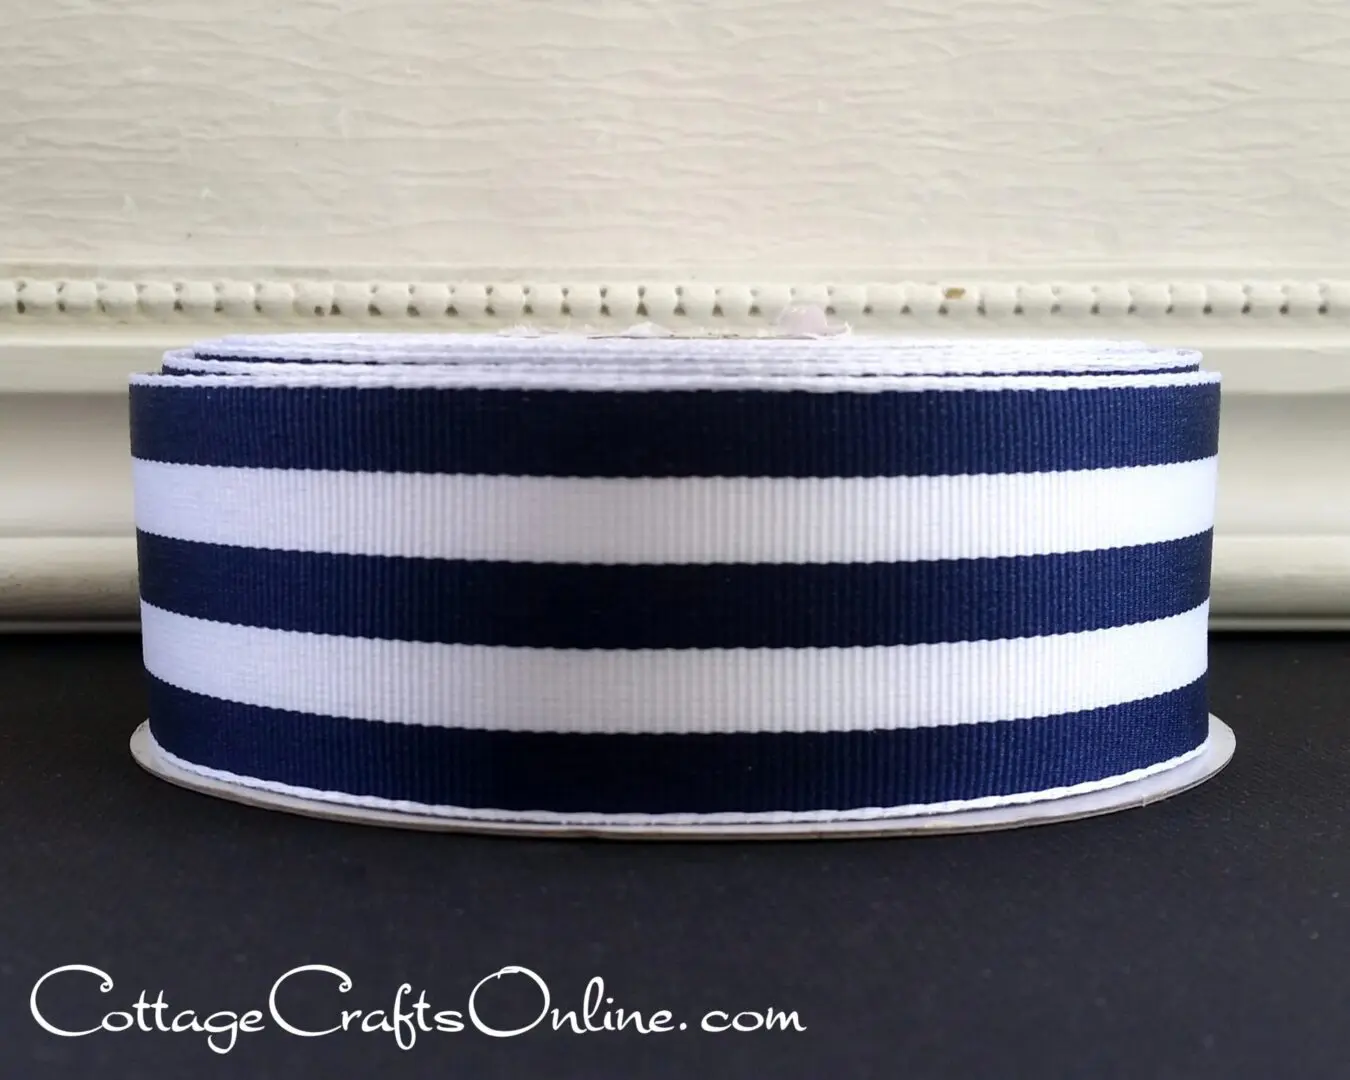 Carnival navy blue and white stripes grosgrain 1.5" wide wired ribbon from the Etsy shop of Cottage Crafts Online.